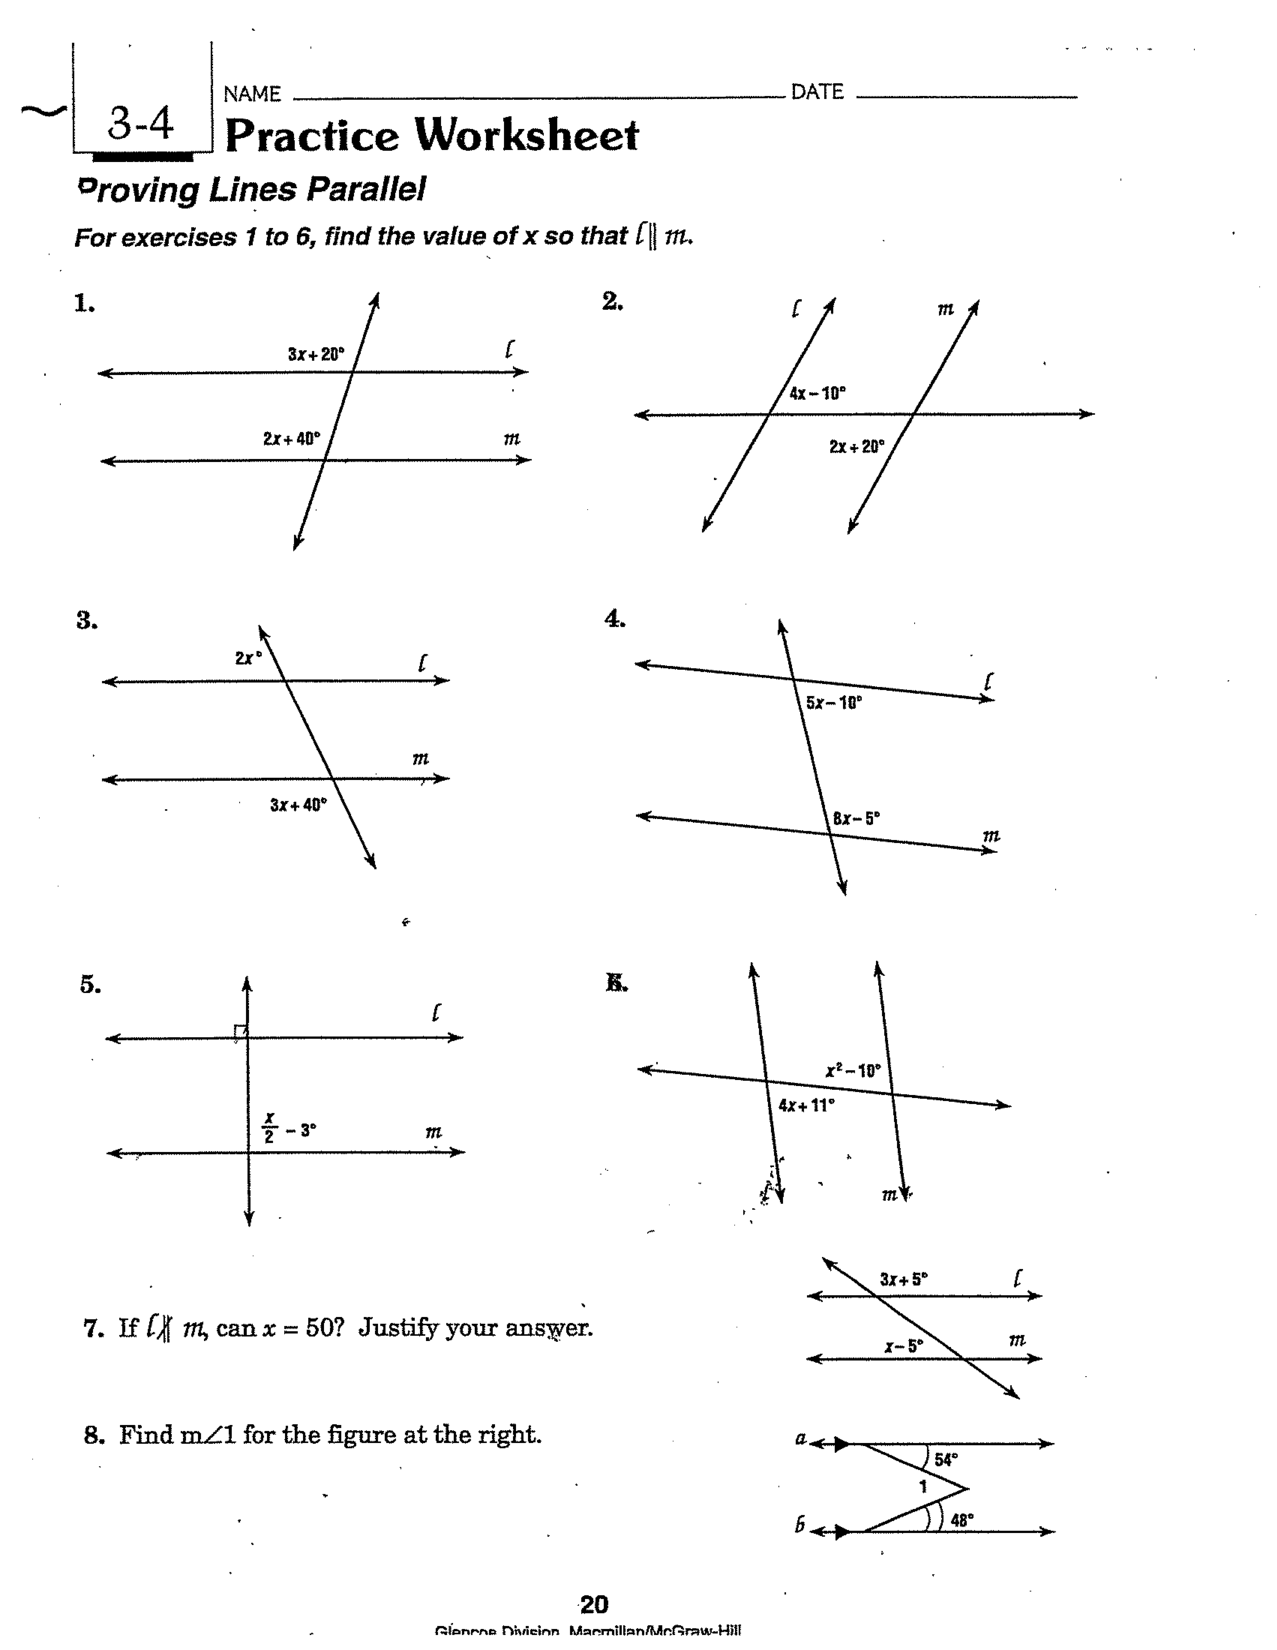 12 Best Images of Shape Perpendicular Lines Worksheet  Perpendicular Lines Worksheet, Parallel 